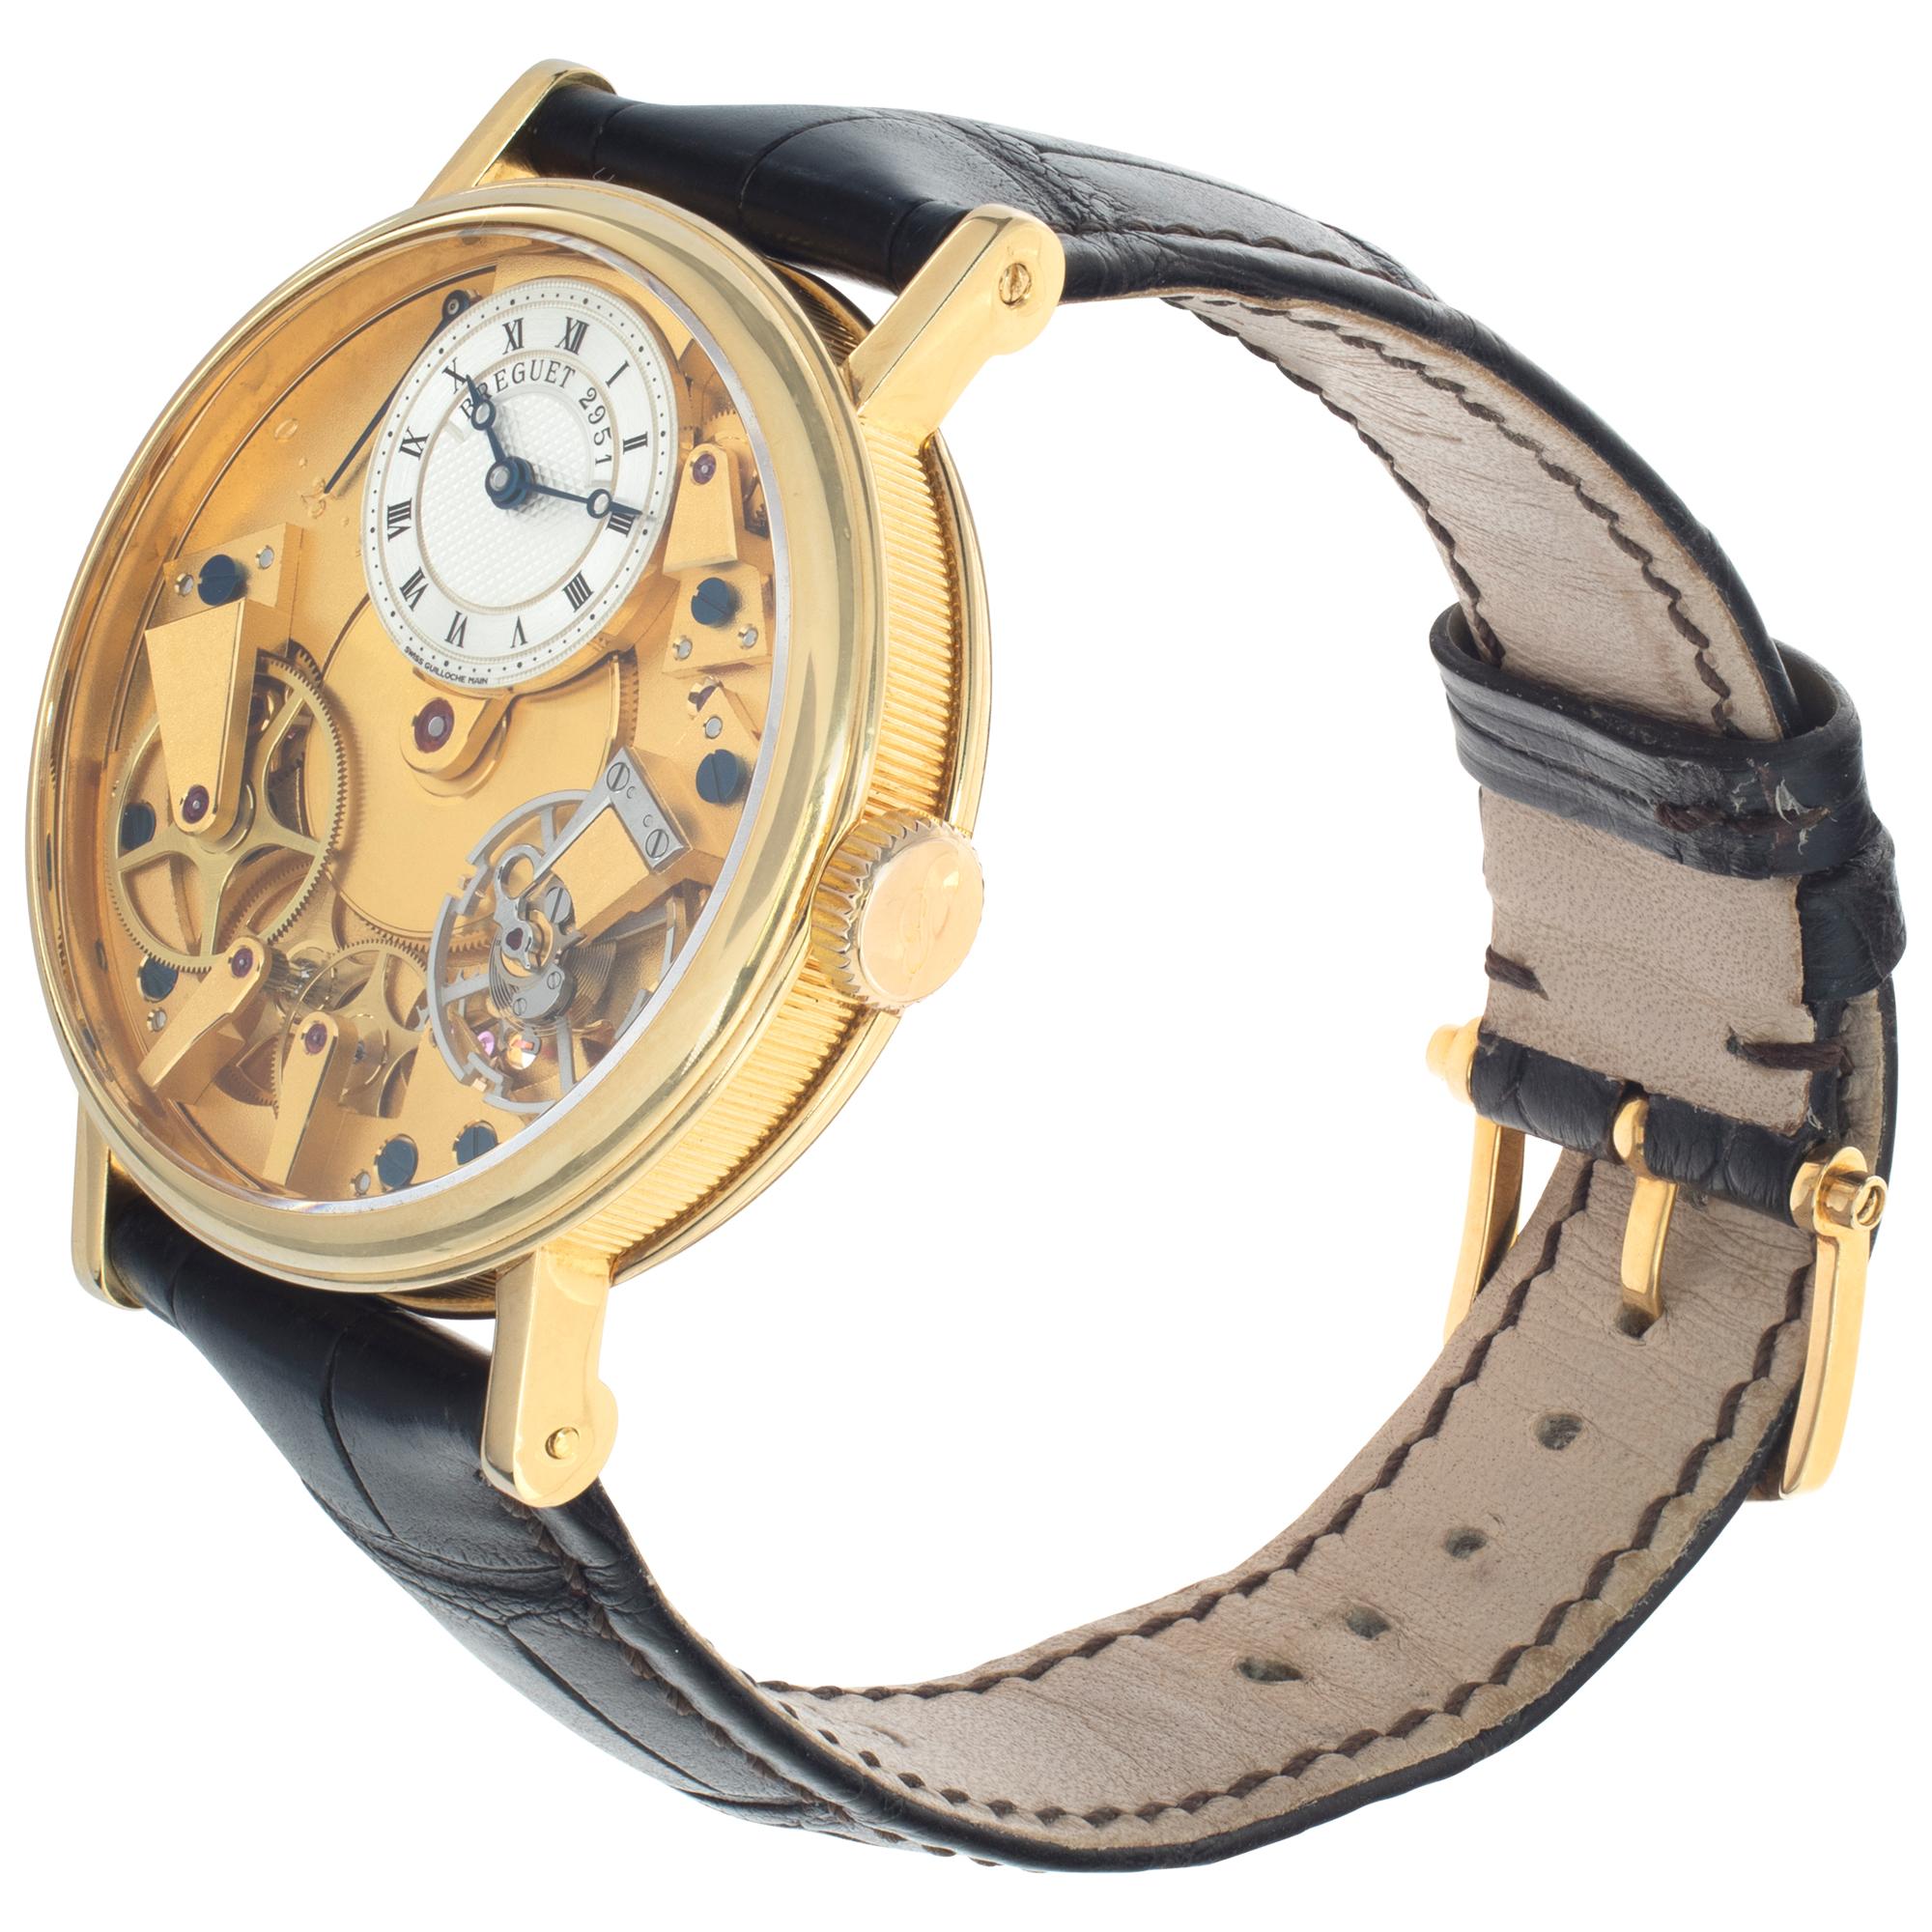 Breguet Tradition in 18k yellow gold on a black alligator strap with an 18k yellow gold Breguet tang buckle. Manual skeletonized movement. 38 mm case size. Ref 7027BA/11/9V6. Fine Pre-owned Breguet Watch.

 Certified preowned Classic Breguet